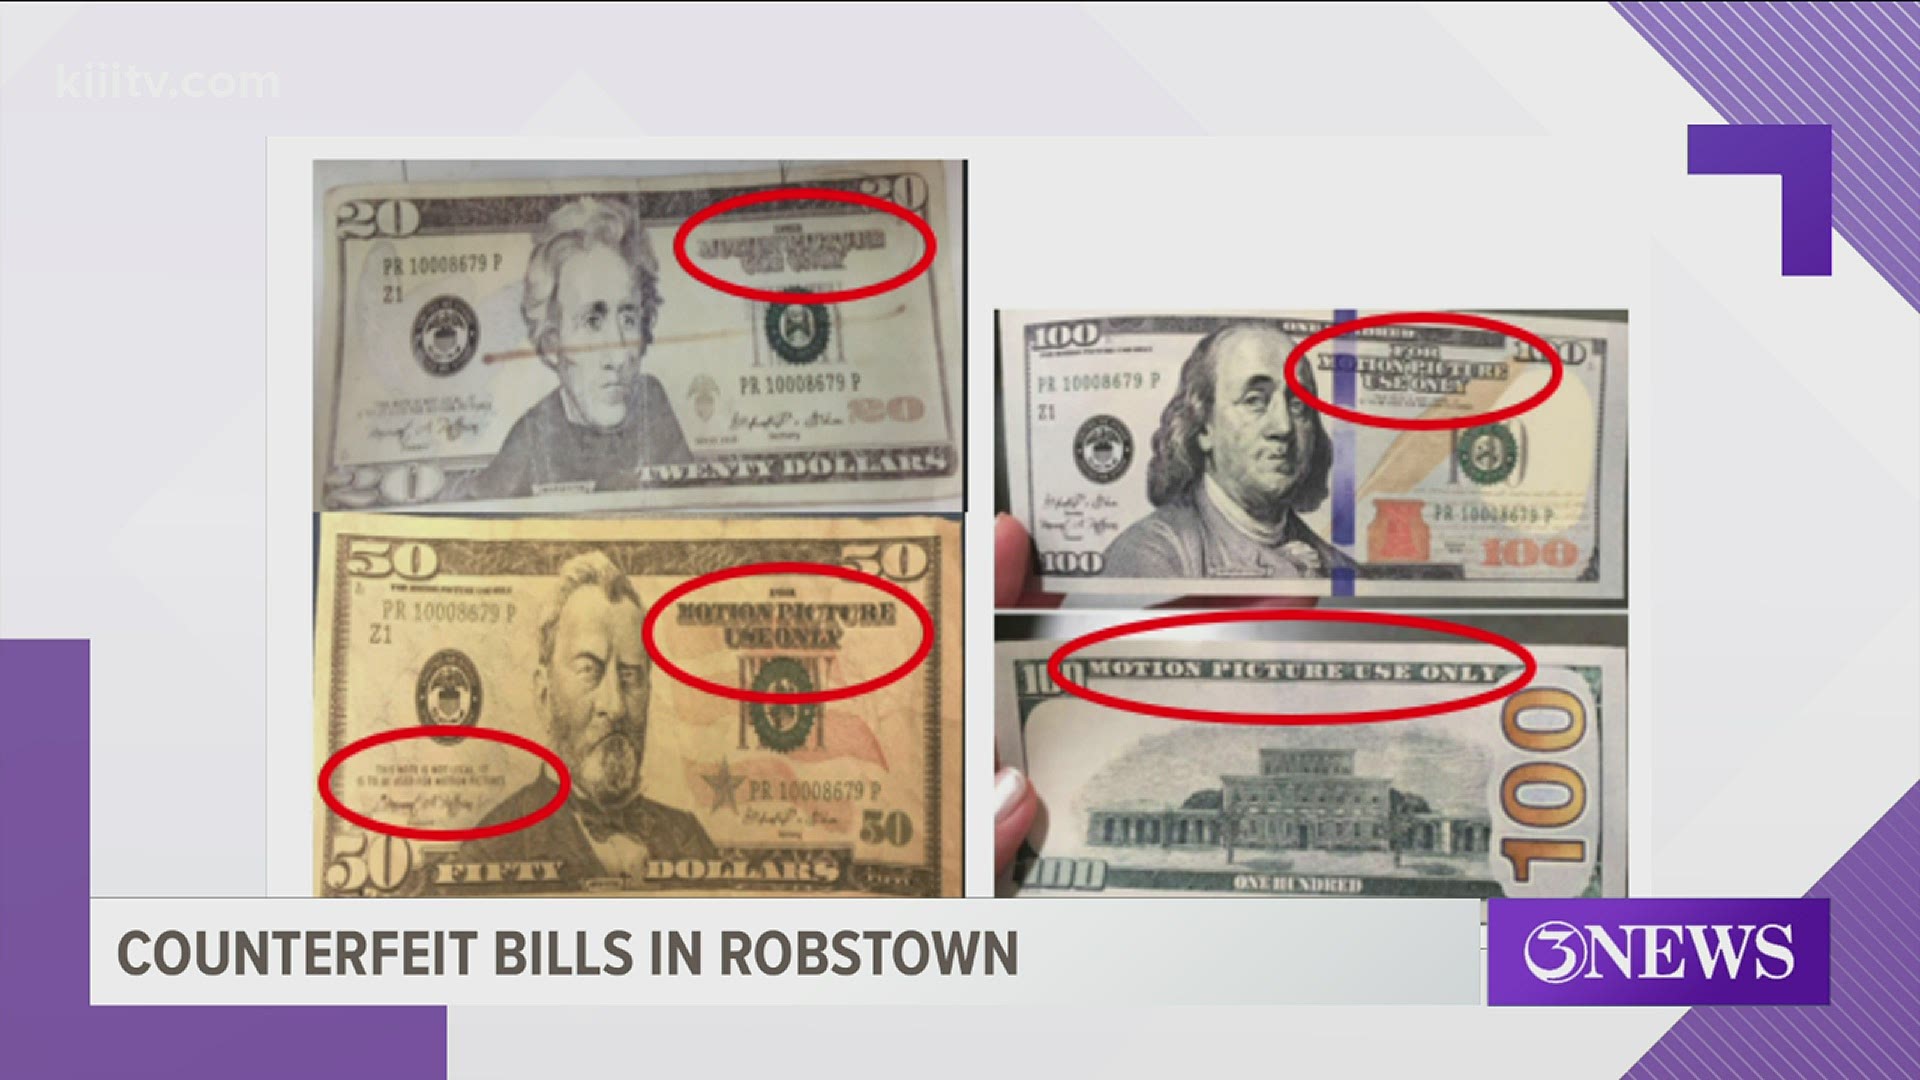 Fake movie money shows up in Canton